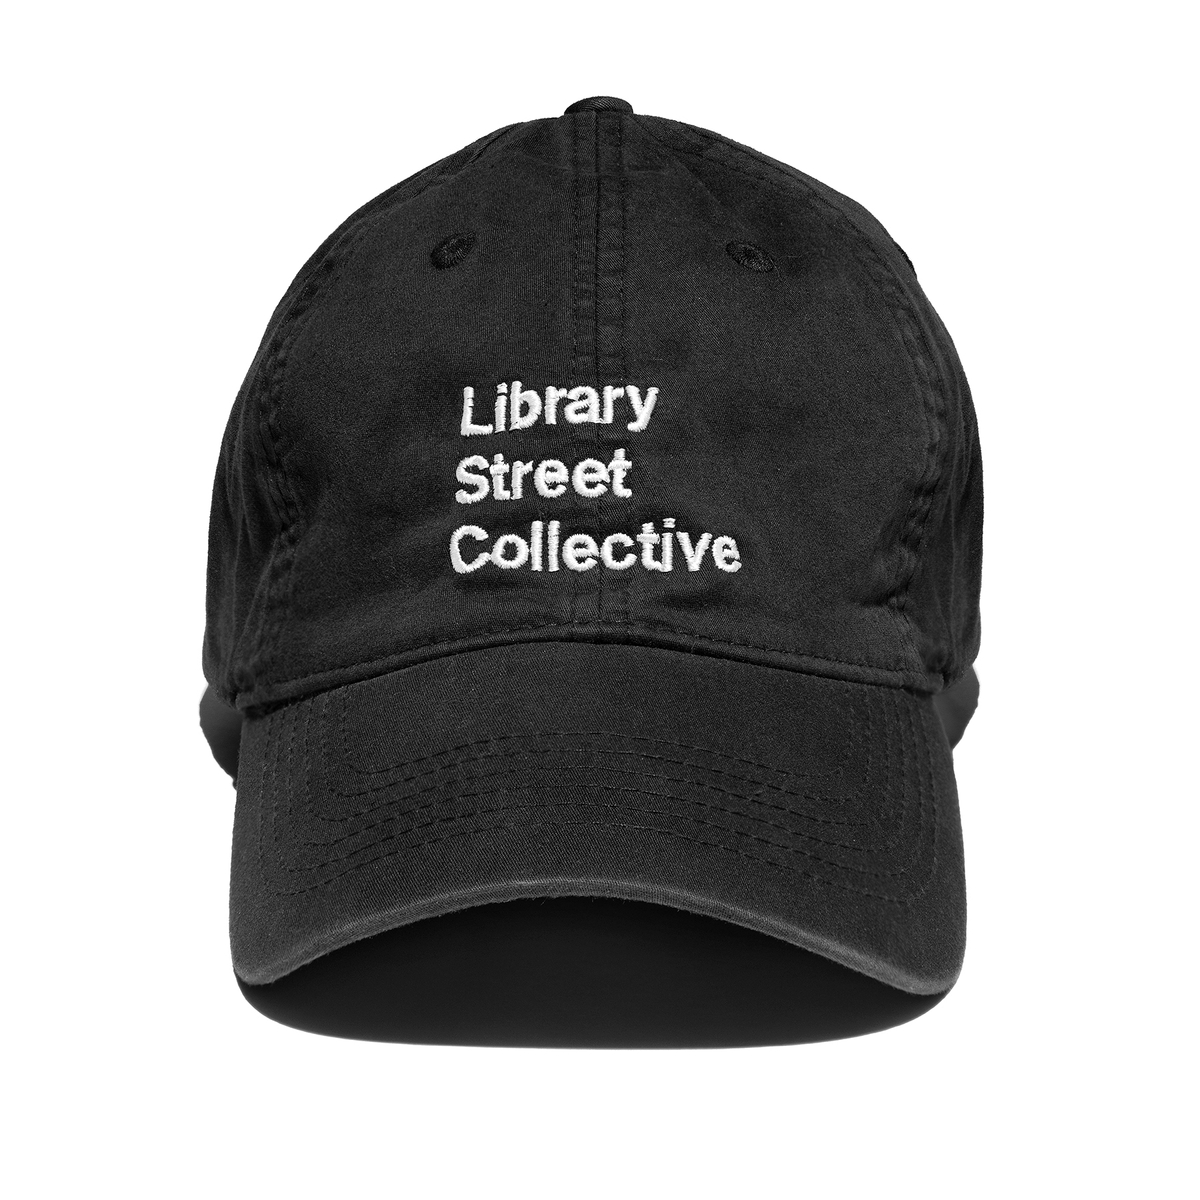 Library Street Collective